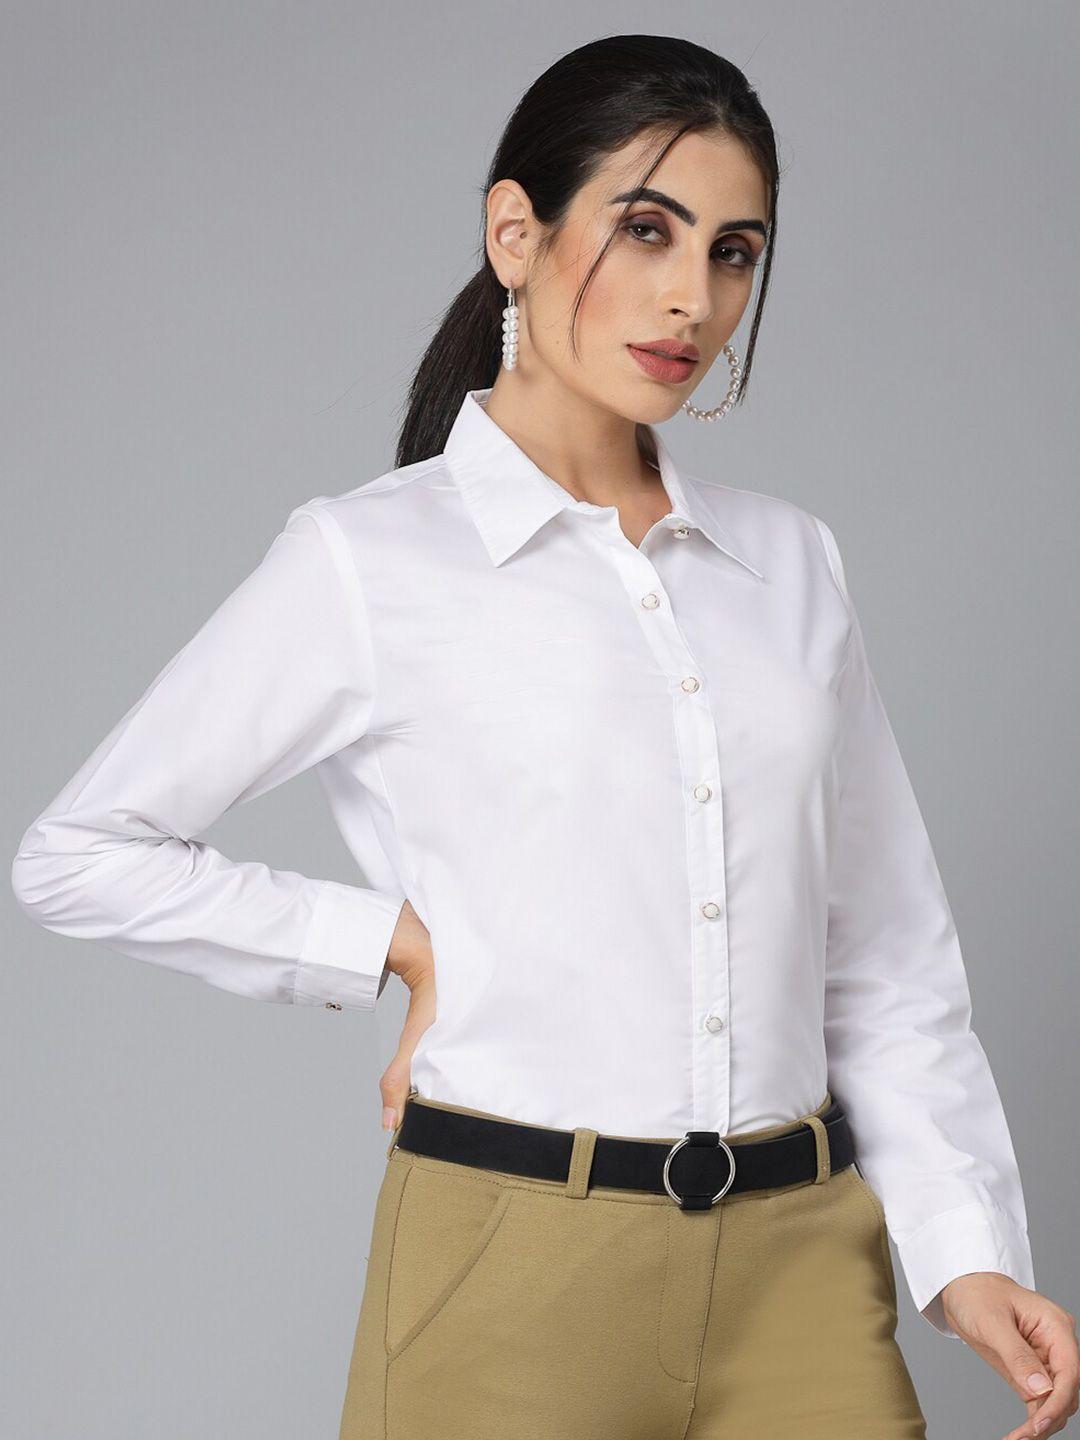 style-quotient-white-smart-formal-shirt